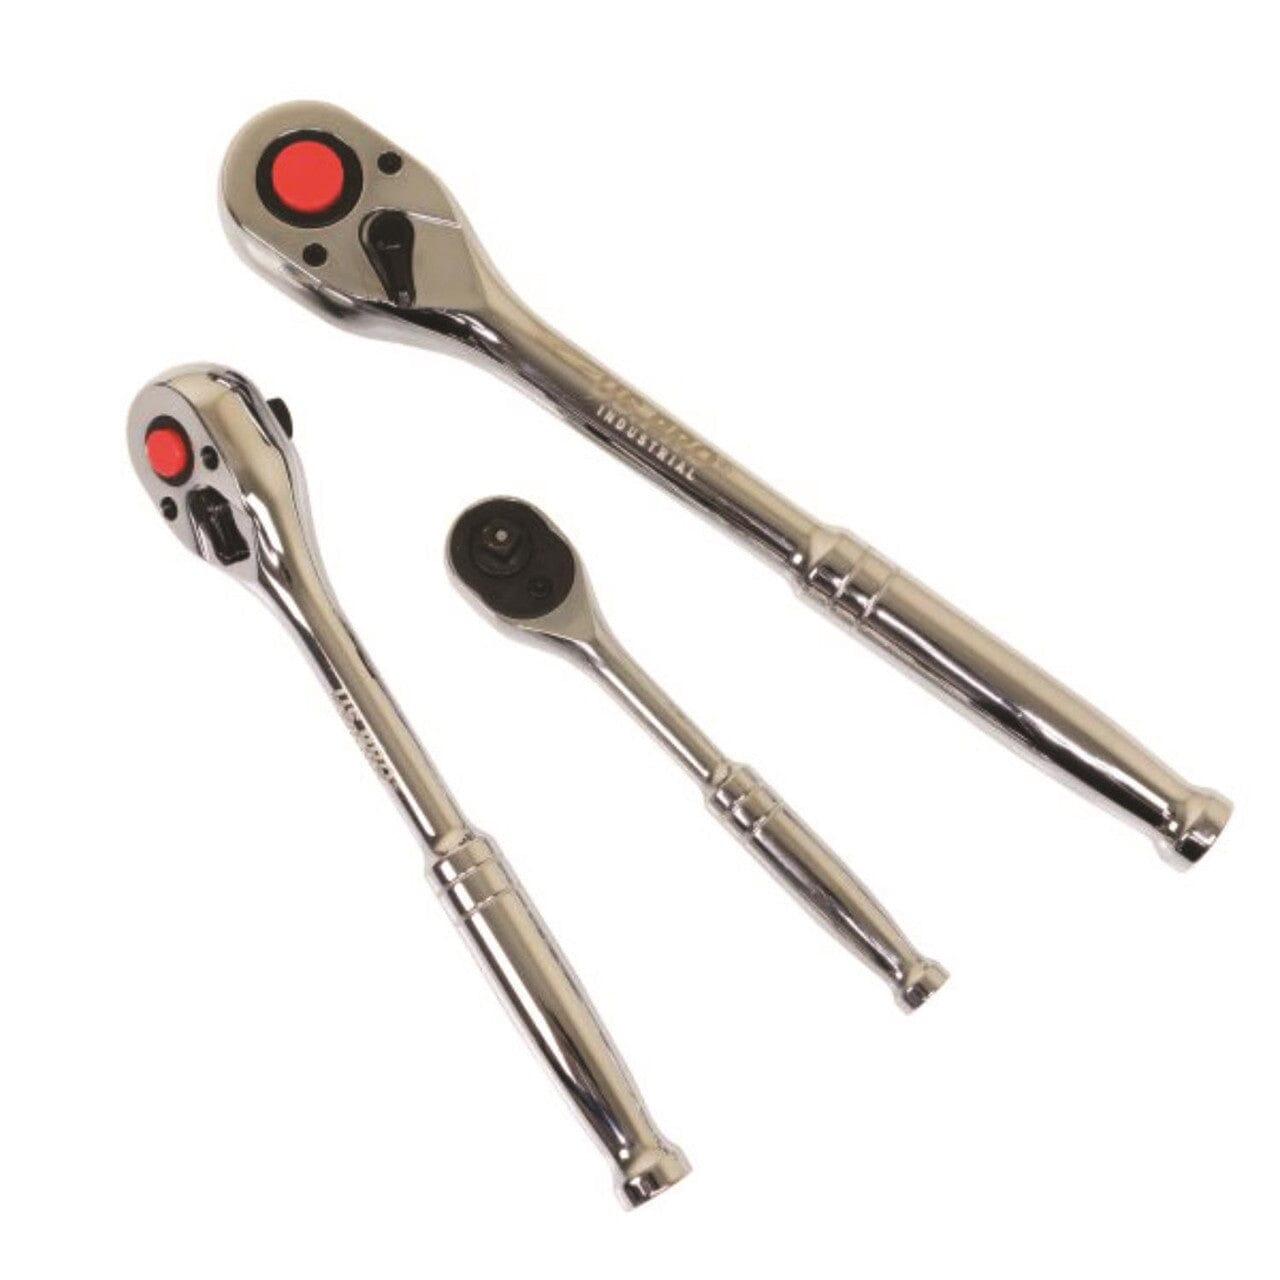 US PRO INDUSTRIAL 90T Ratchet Handle Set 1/4" 3/8" 1/2" Drive Short Socket Wrenches 4228 - Tools 2U Direct SW